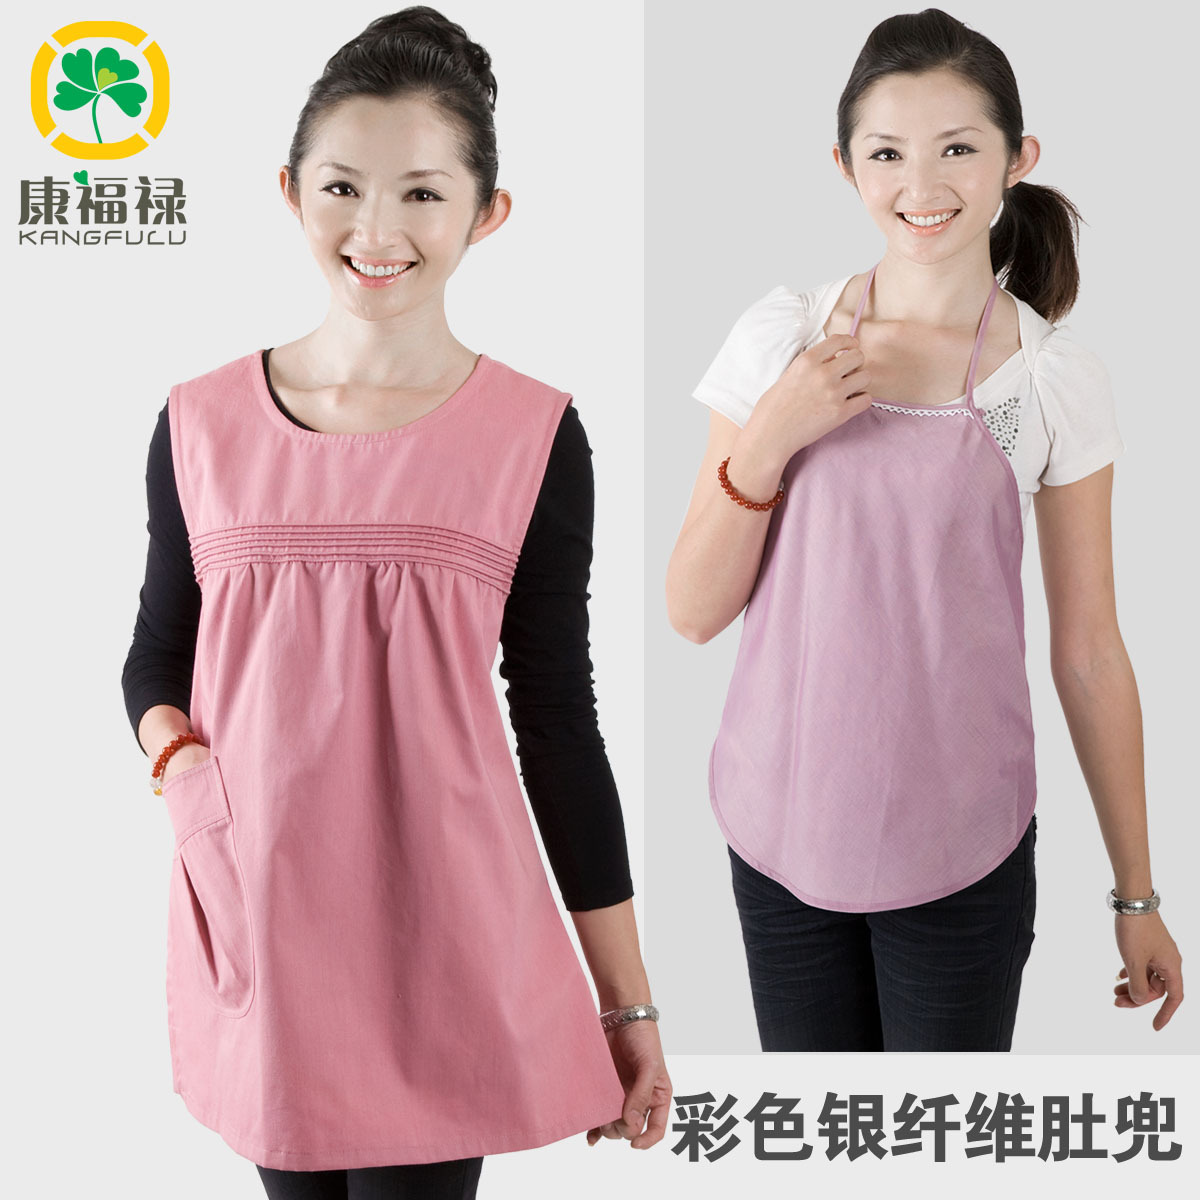 Superacids radiation-resistant double layer silver fiber apron type lining kfl604a